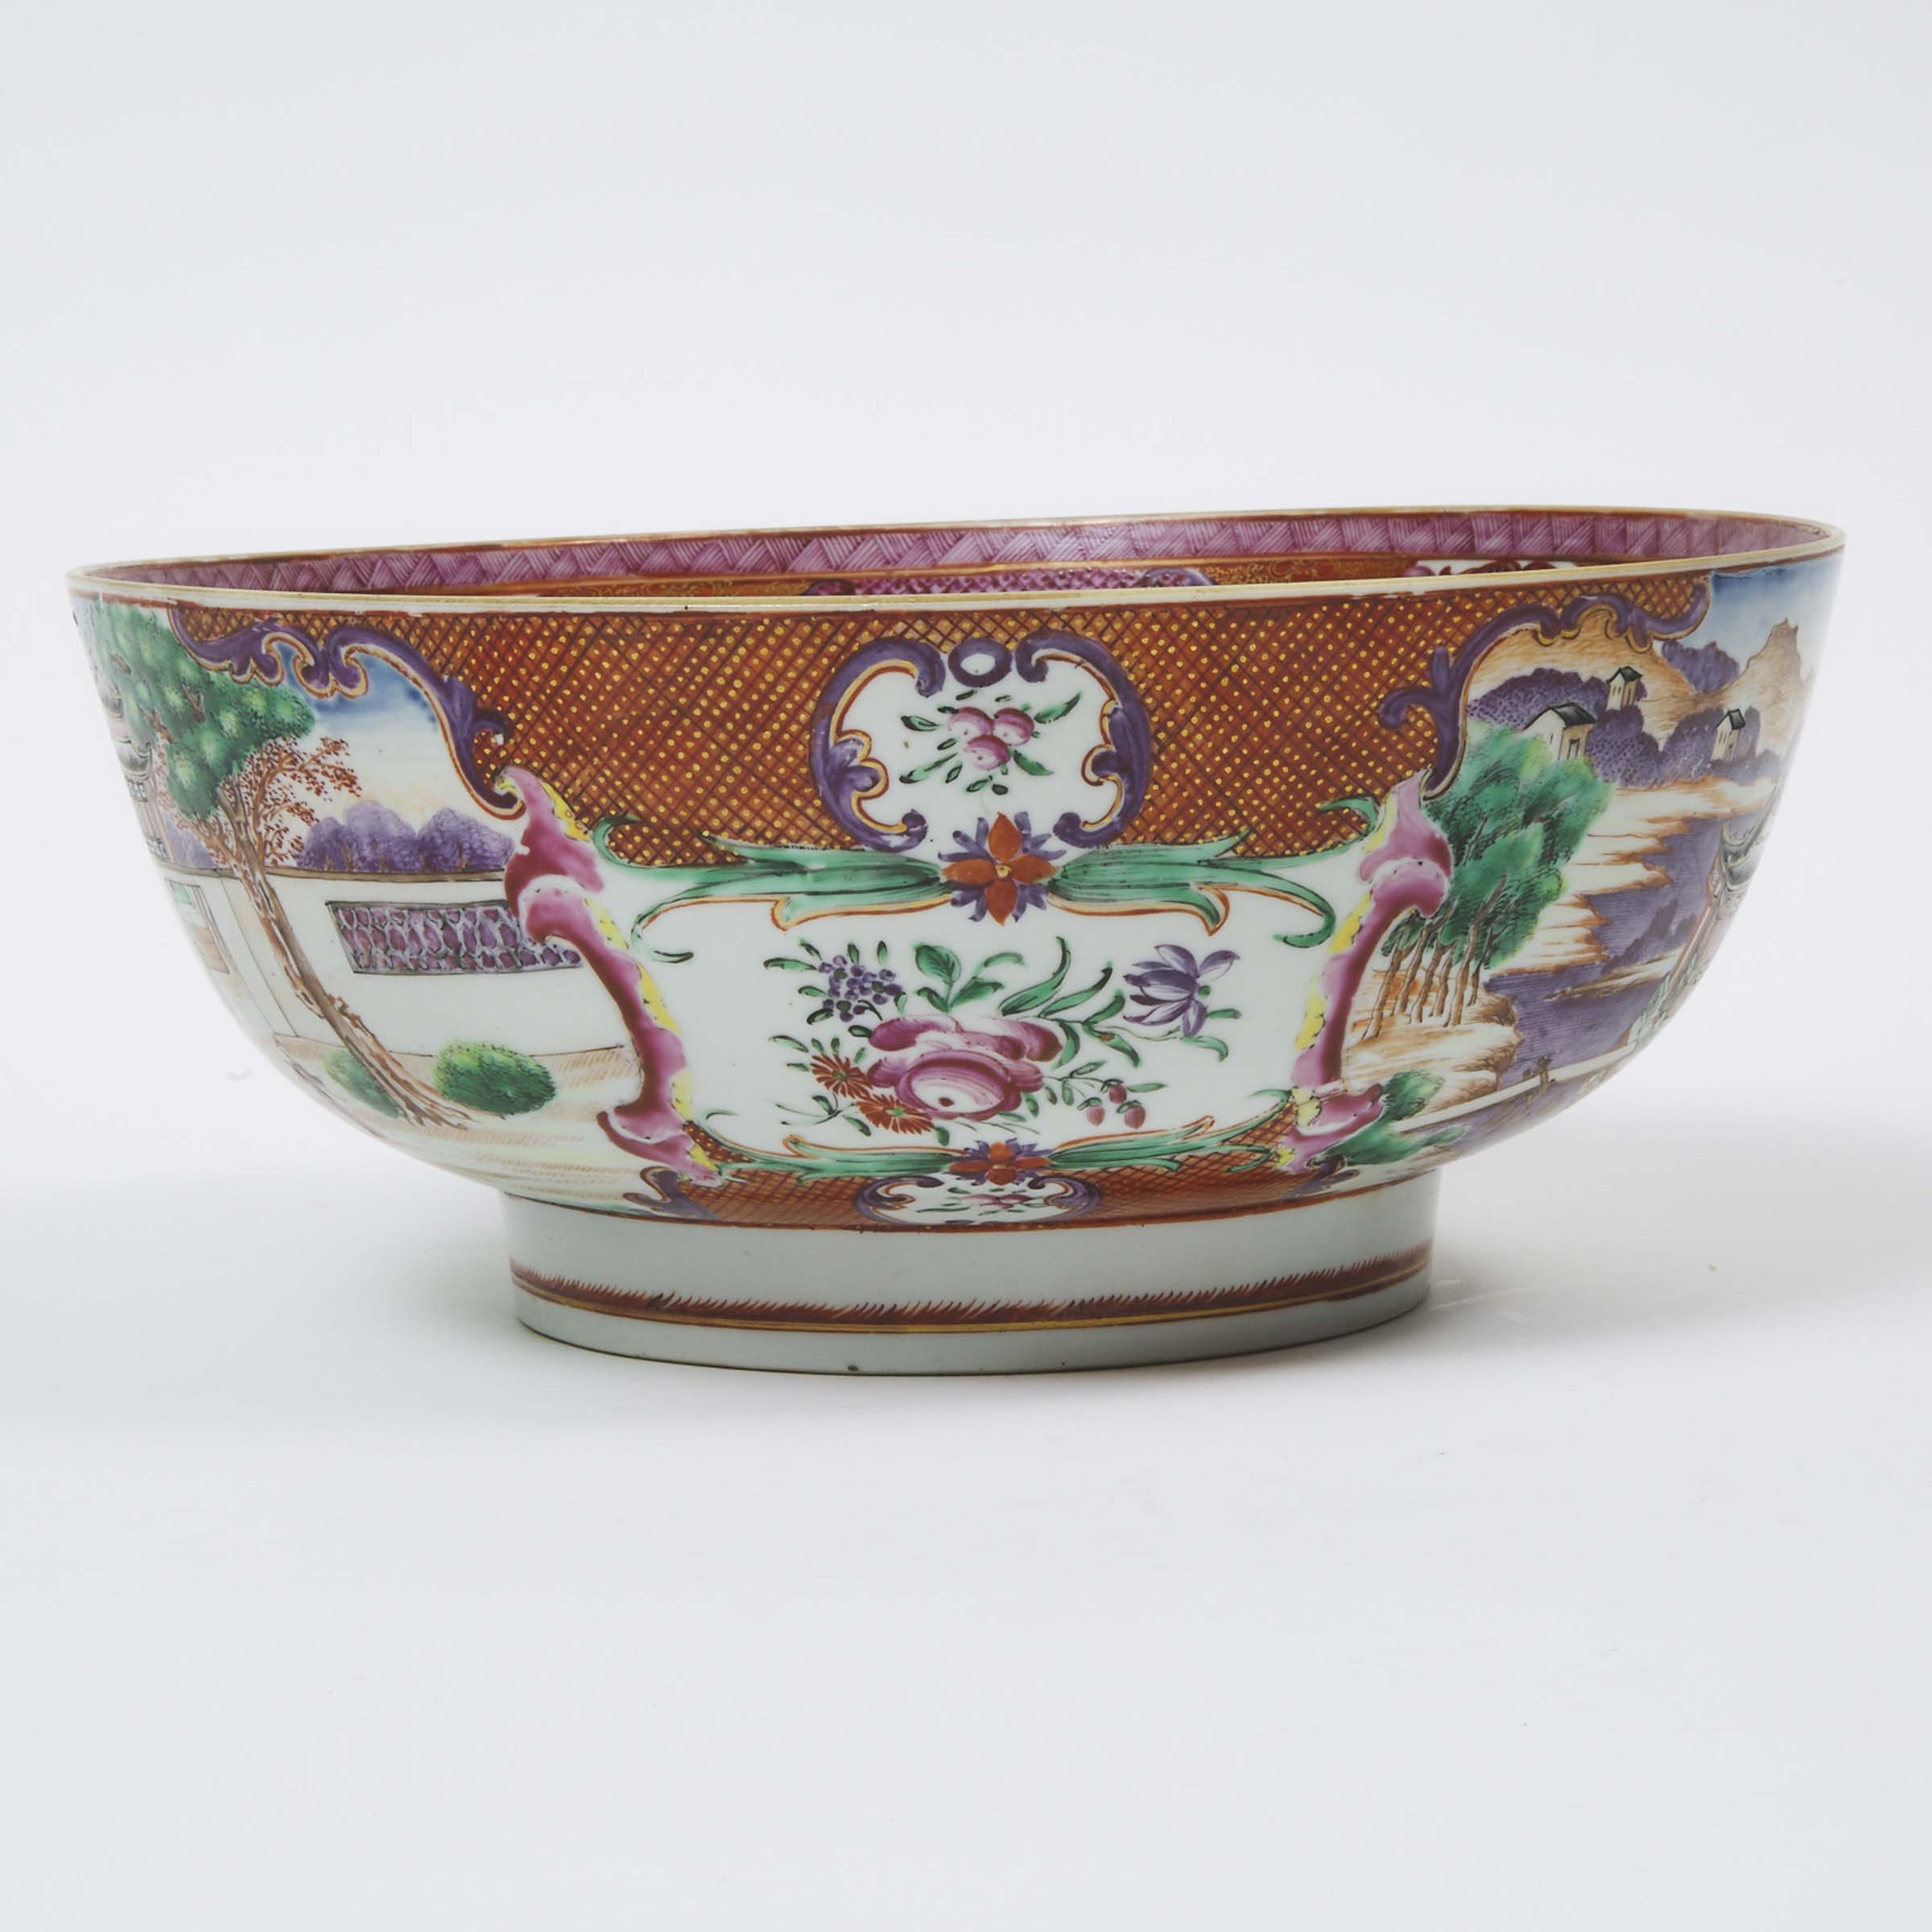 A Chinese Export Punch Bowl, 18th Century